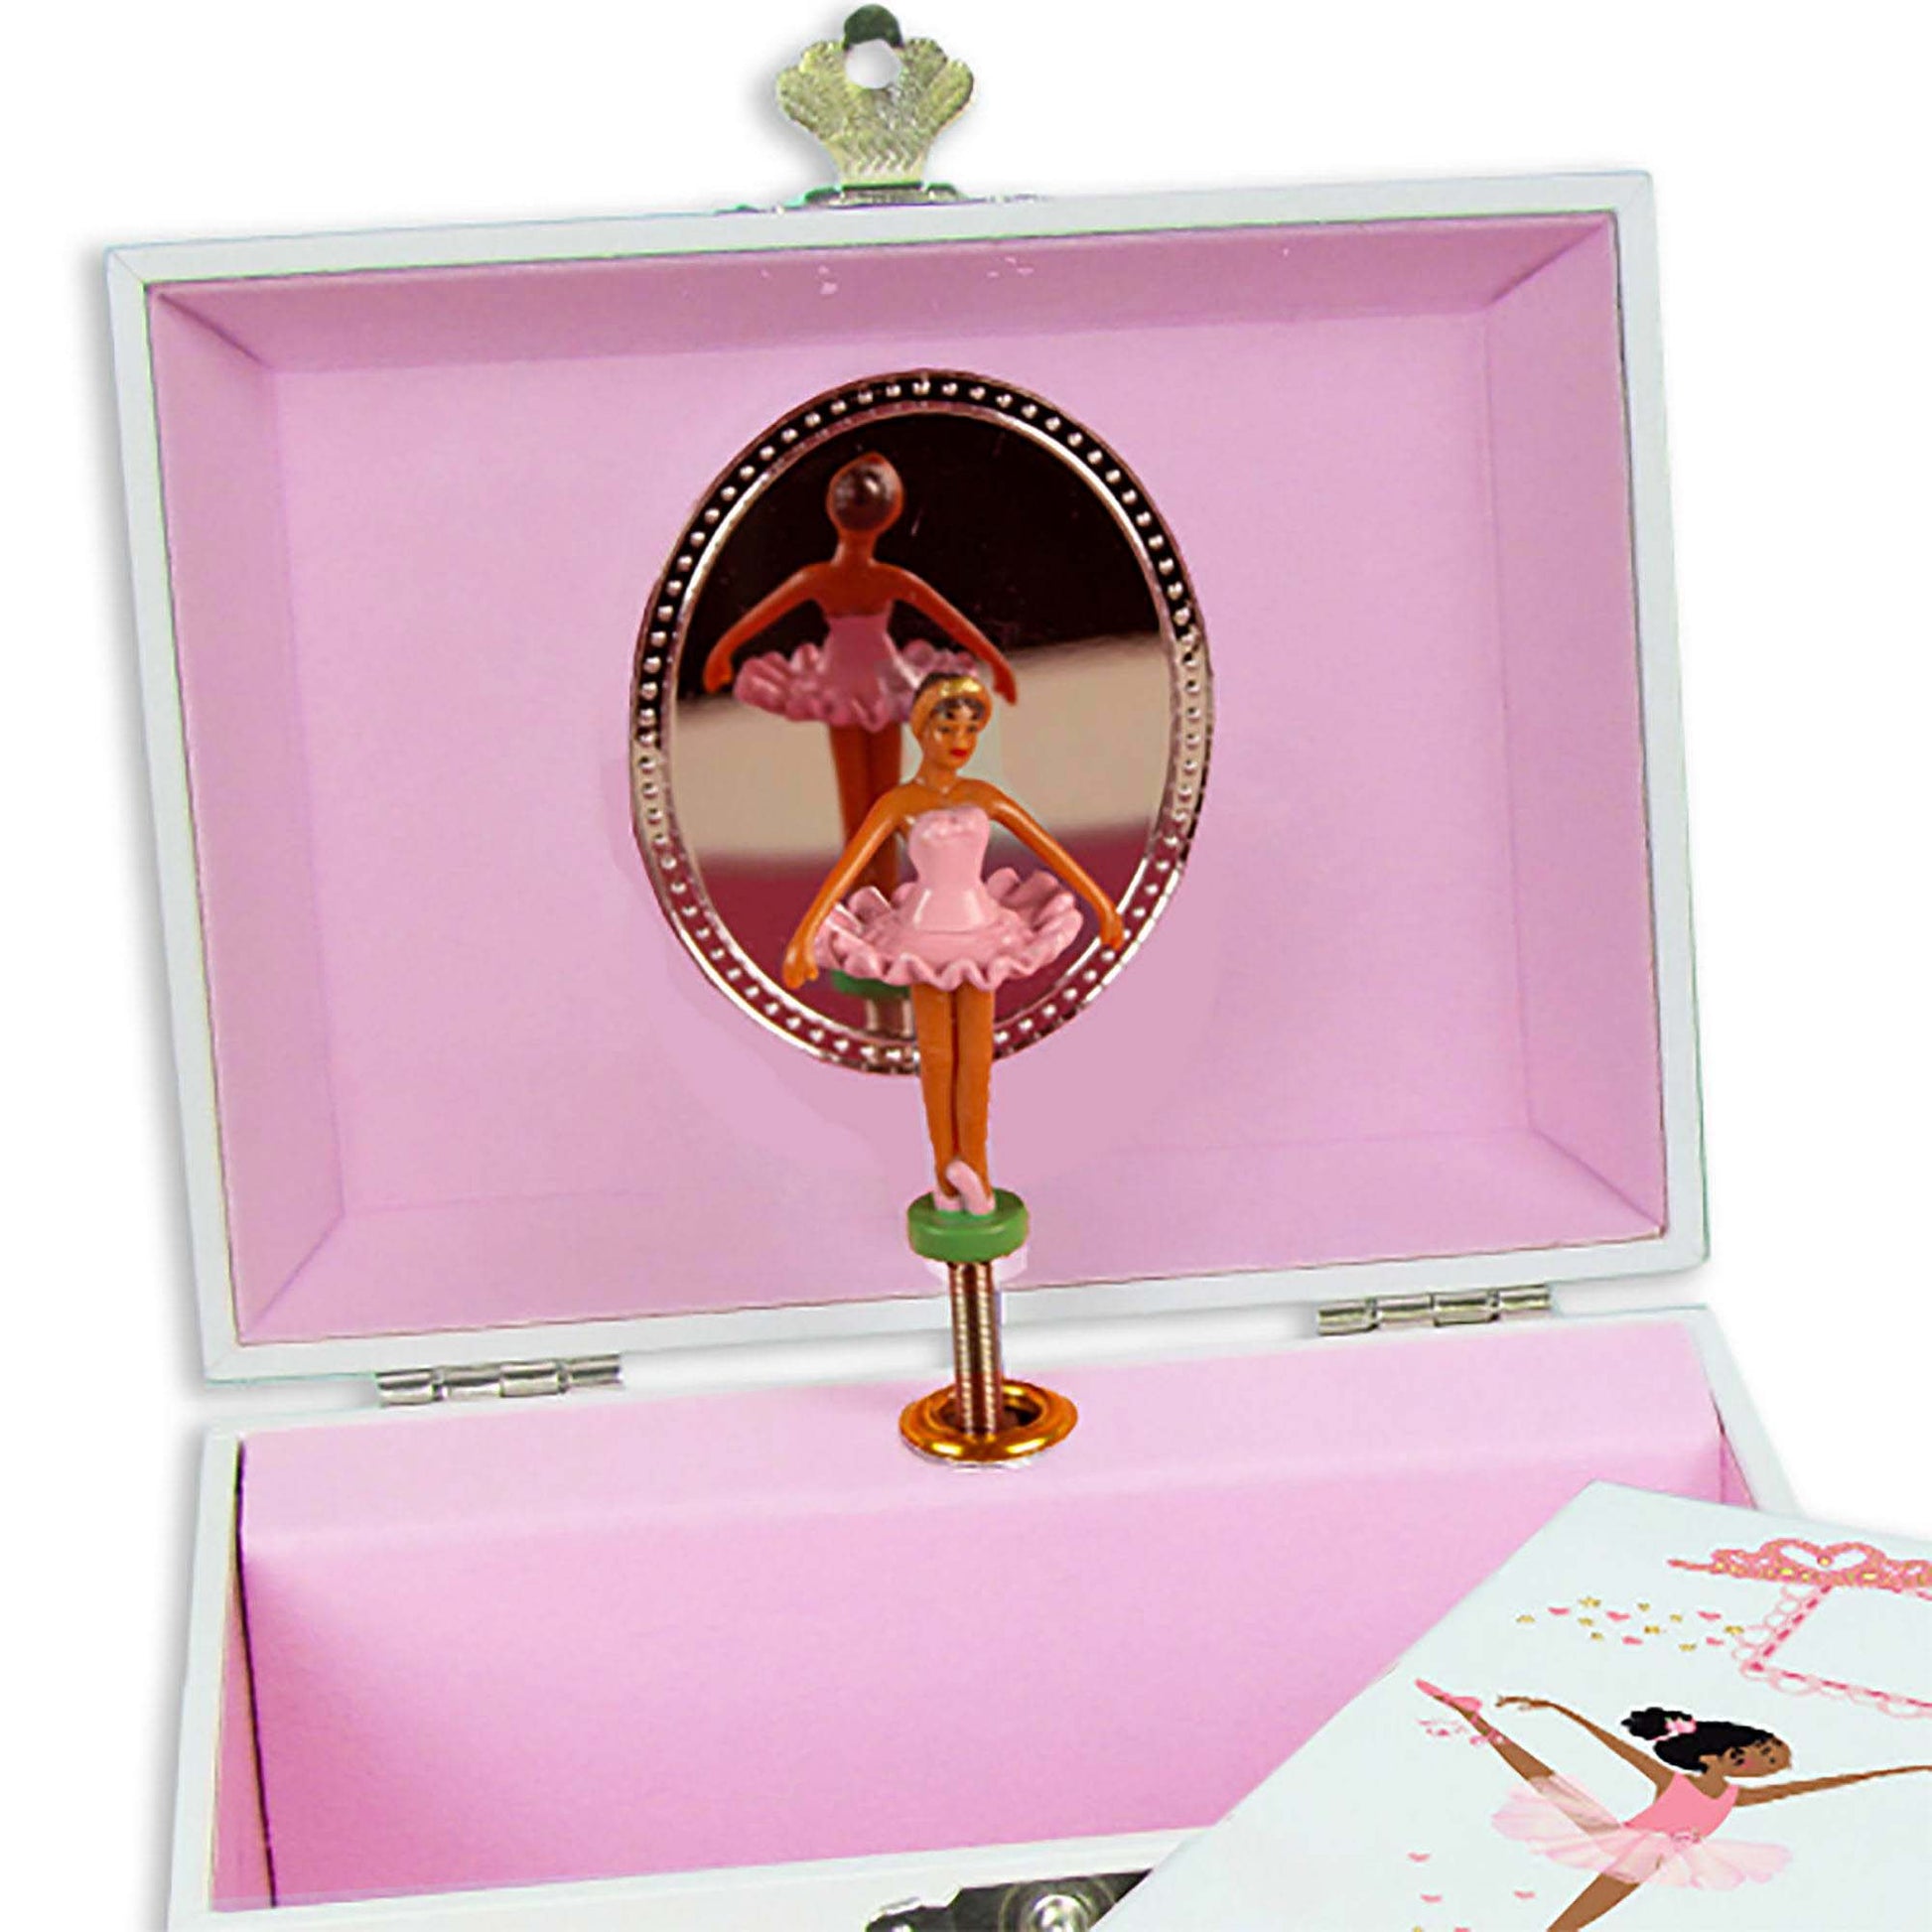 Personalized Ballerina Jewelry Box with Volley Balls design